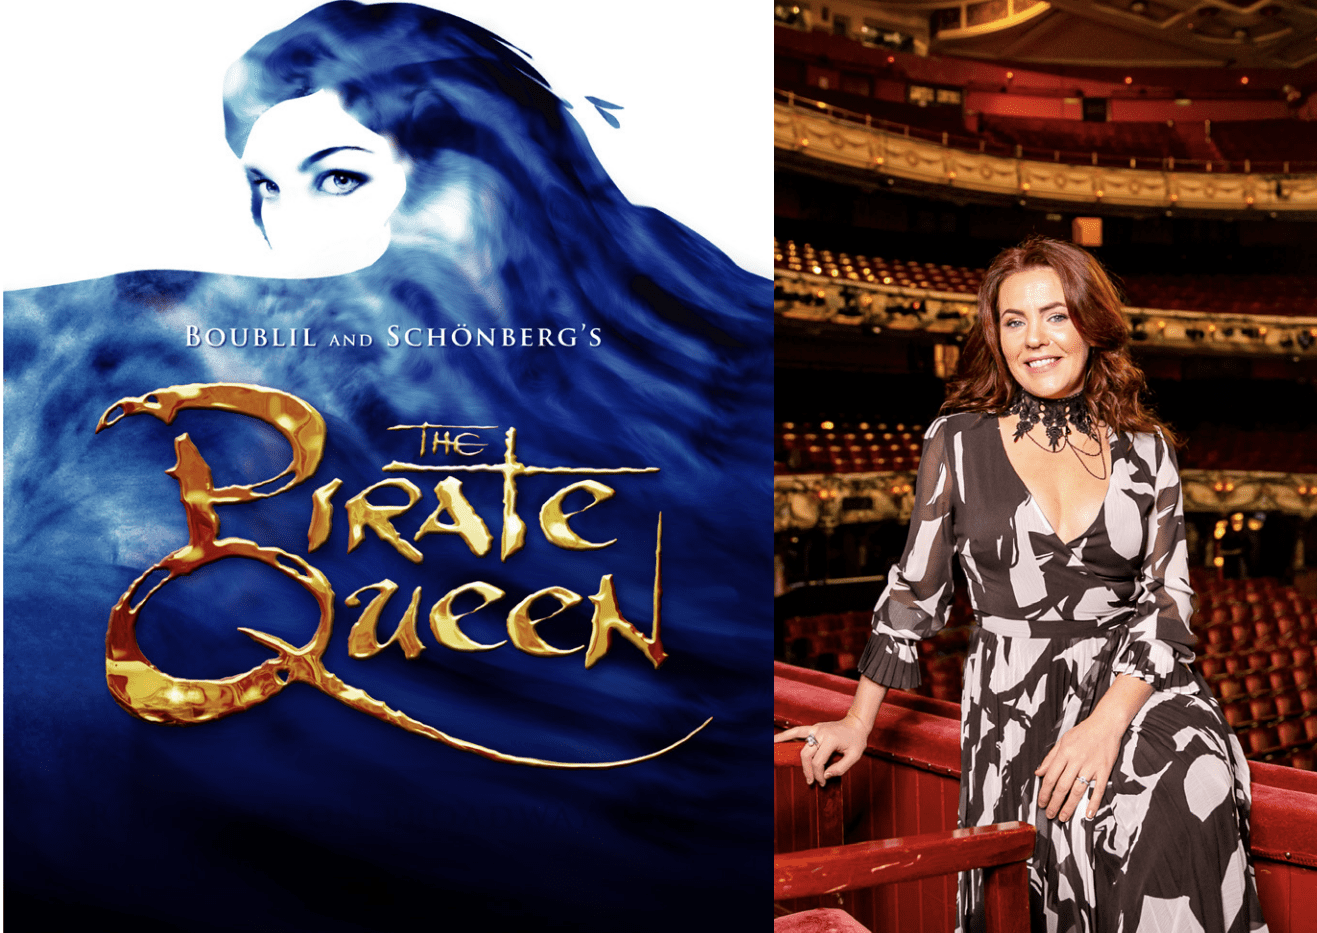 West End star Rachel Tucker, ‘Britain’s Got Talent’ winner Jai McDowall and Matthew Pagan from Collabro are to headline a star-studded charity gala performance of Boublil And Schönberg’s ‘The Pirate Queen’ at the London Coliseum